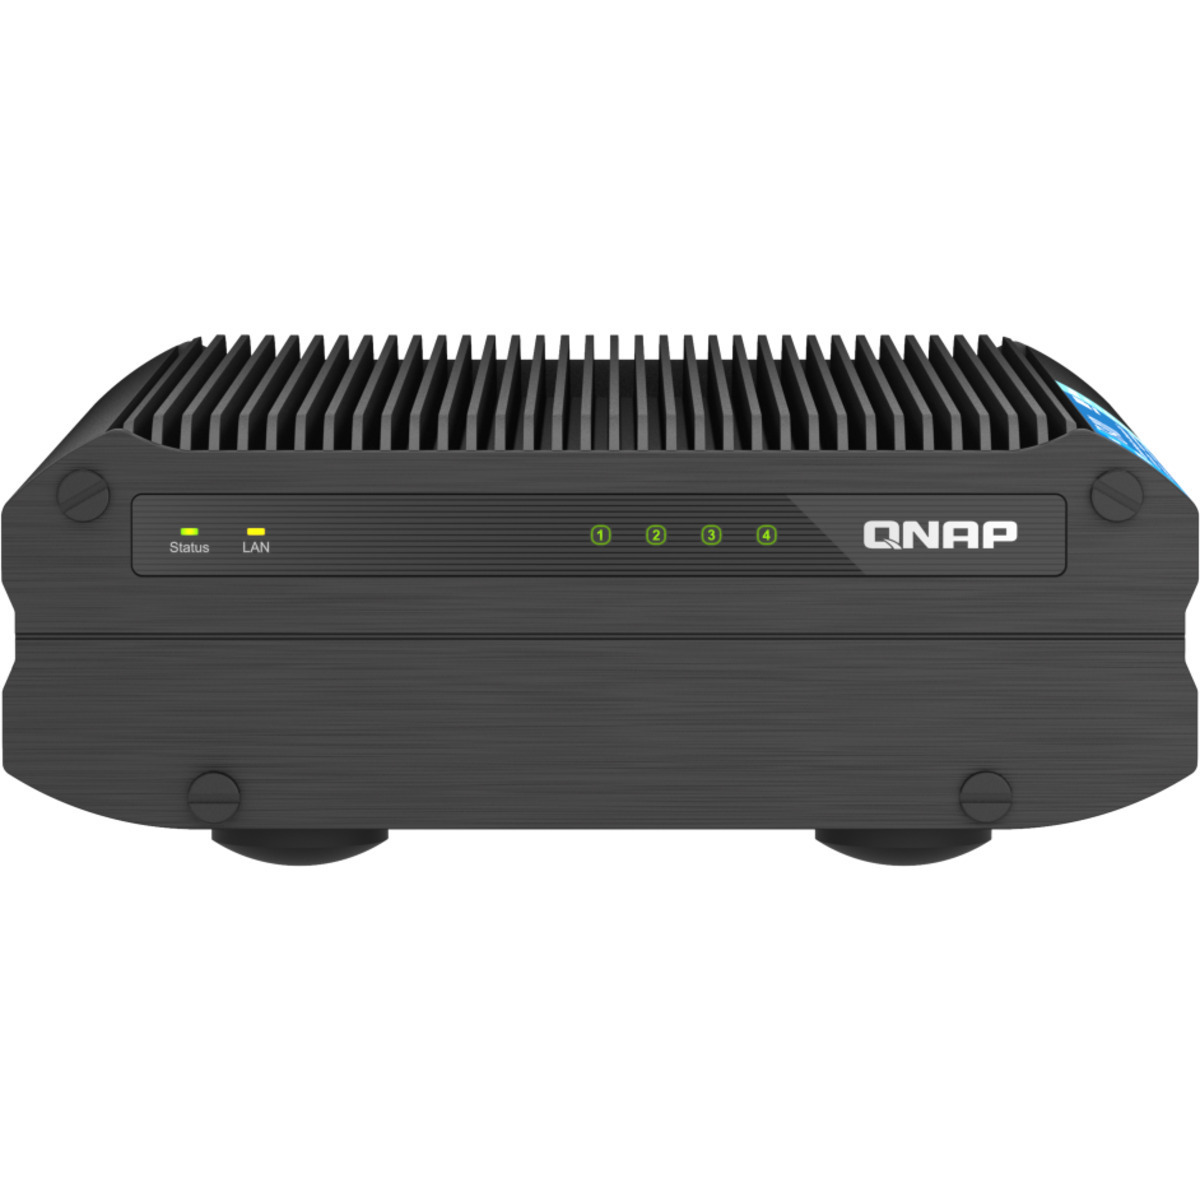 QNAP TS-i410X 3tb 4-Bay Desktop Multimedia / Power User / Business NAS - Network Attached Storage Device 3x1tb Sandisk Ultra 3D SDSSDH3-1T00 2.5 560/520MB/s SATA 6Gb/s SSD CONSUMER Class Drives Installed - Burn-In Tested TS-i410X